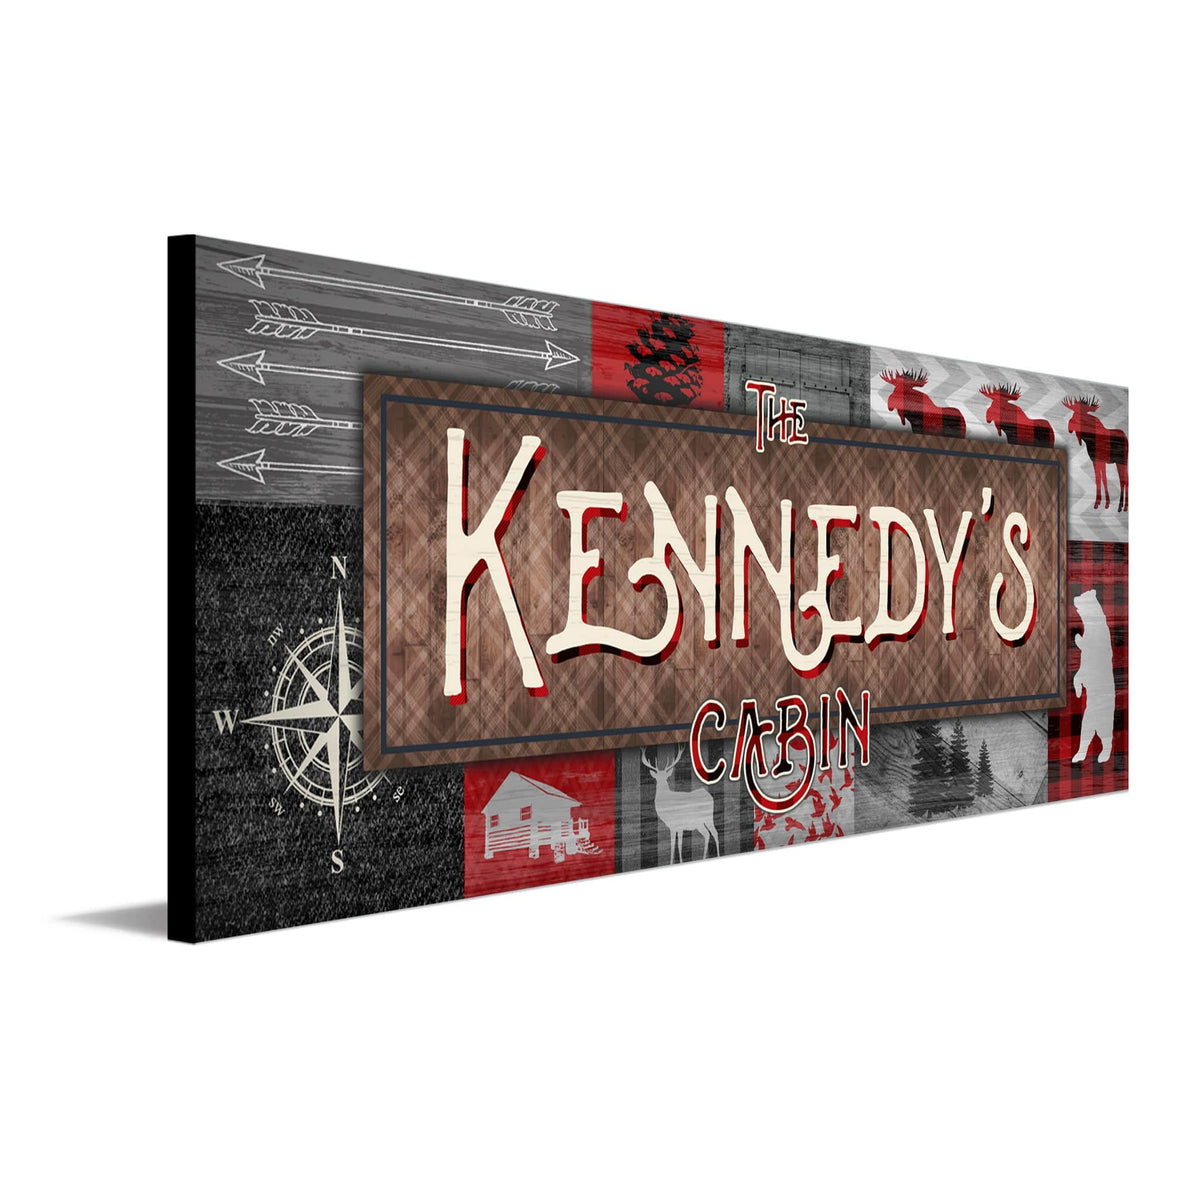 Personalized Buffalo Plaid themed cabin sign with outdoor patterns of moose, deer, and bears- angled view